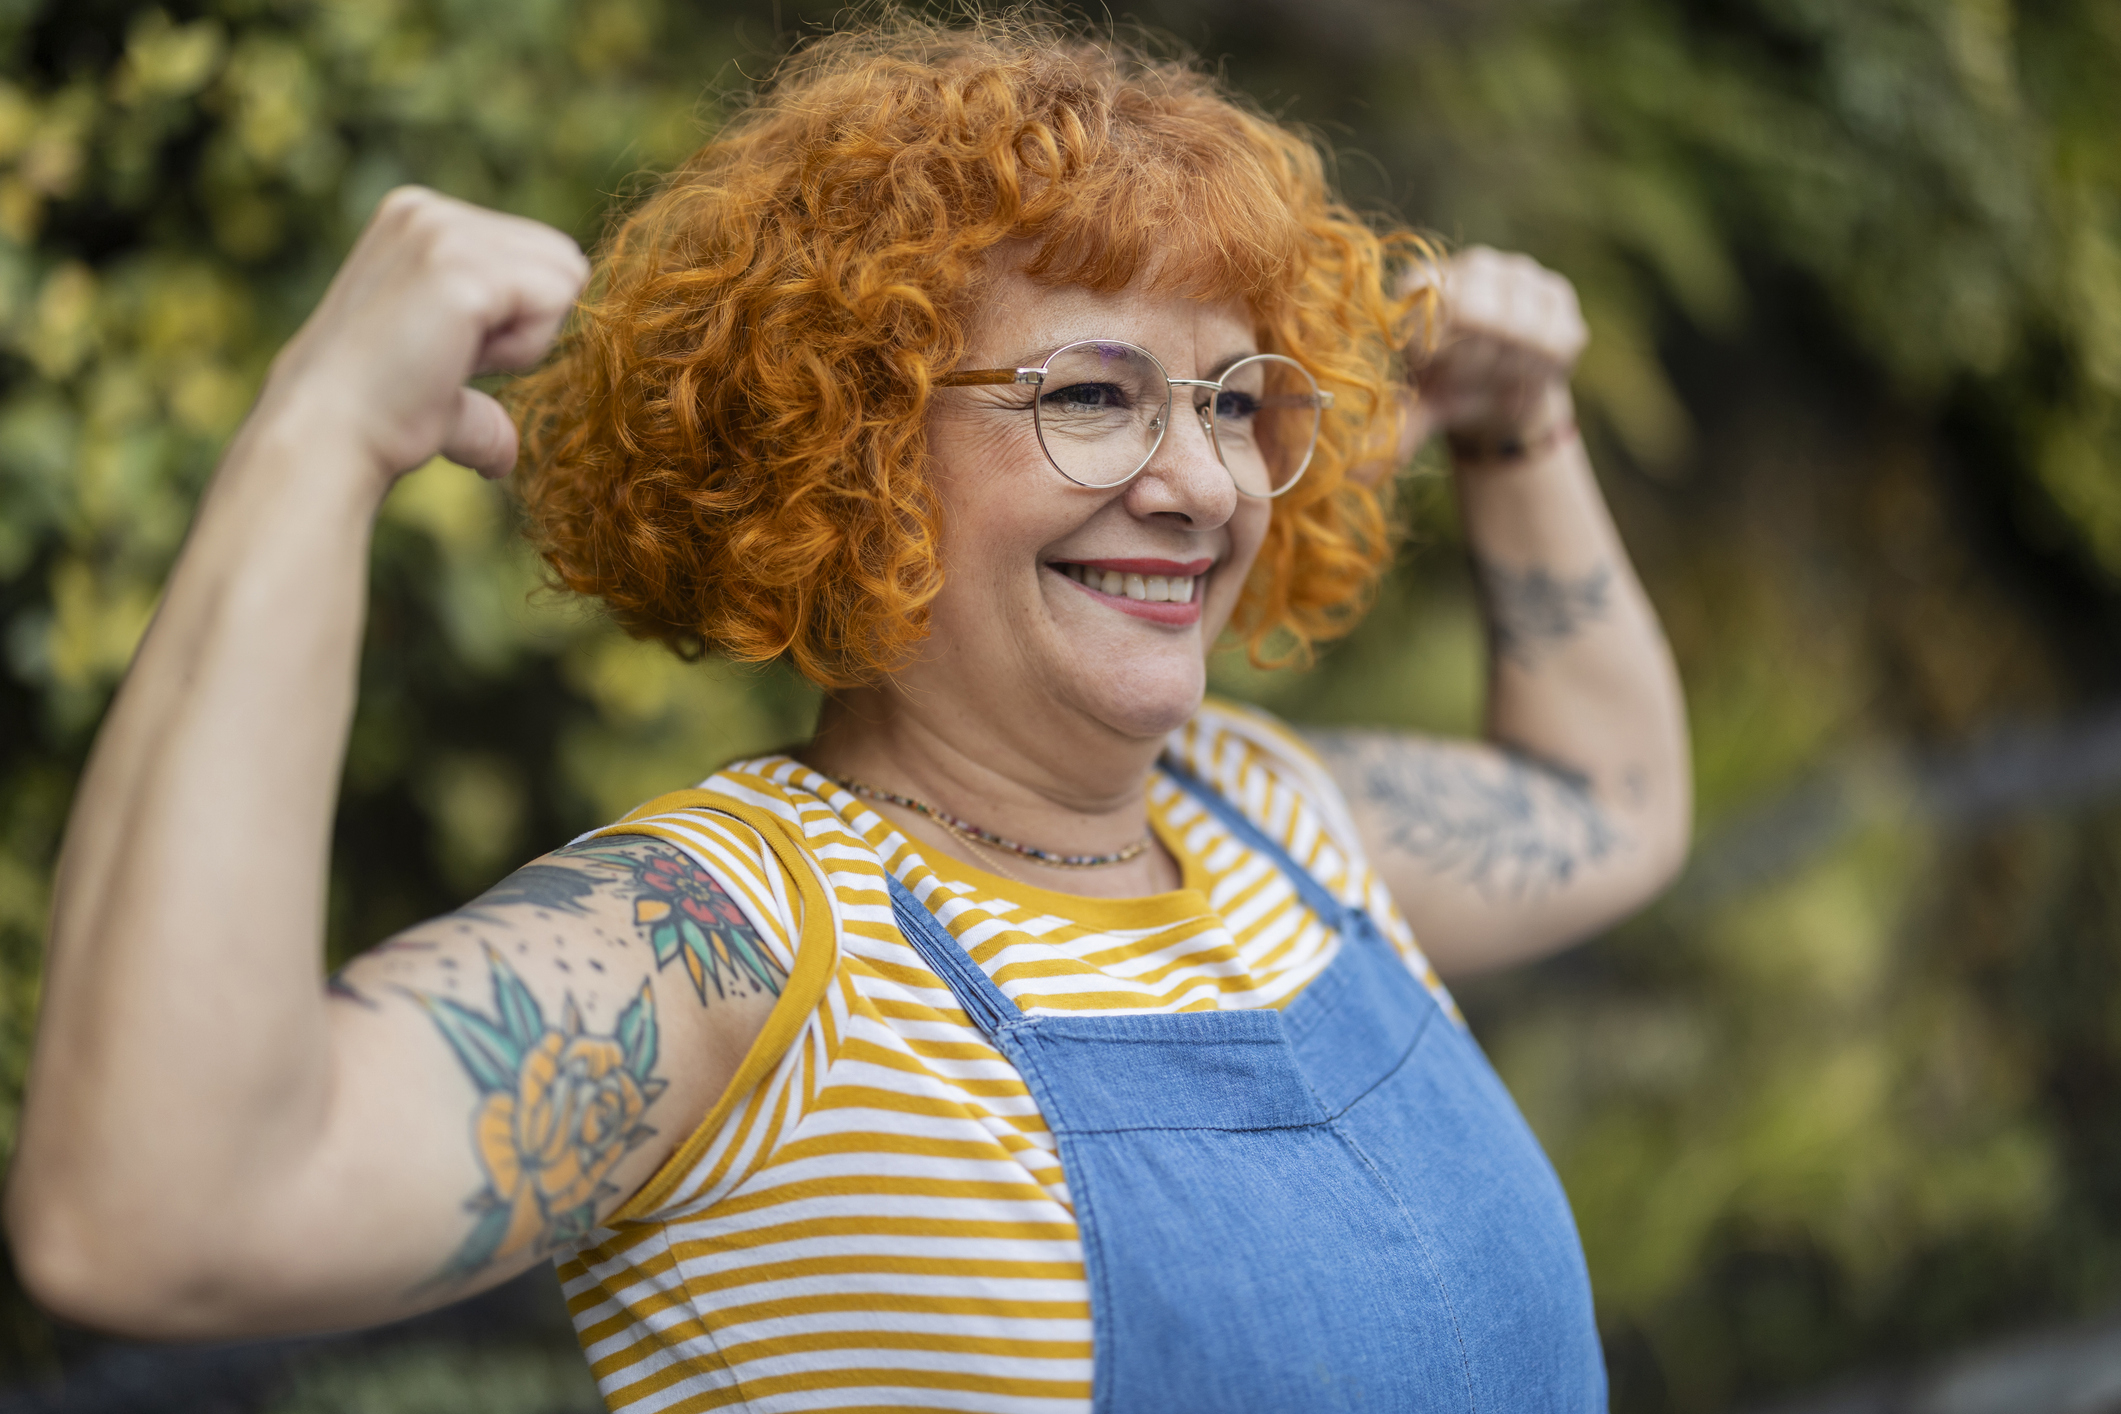 A woman in overalls flexing her arms and smiling